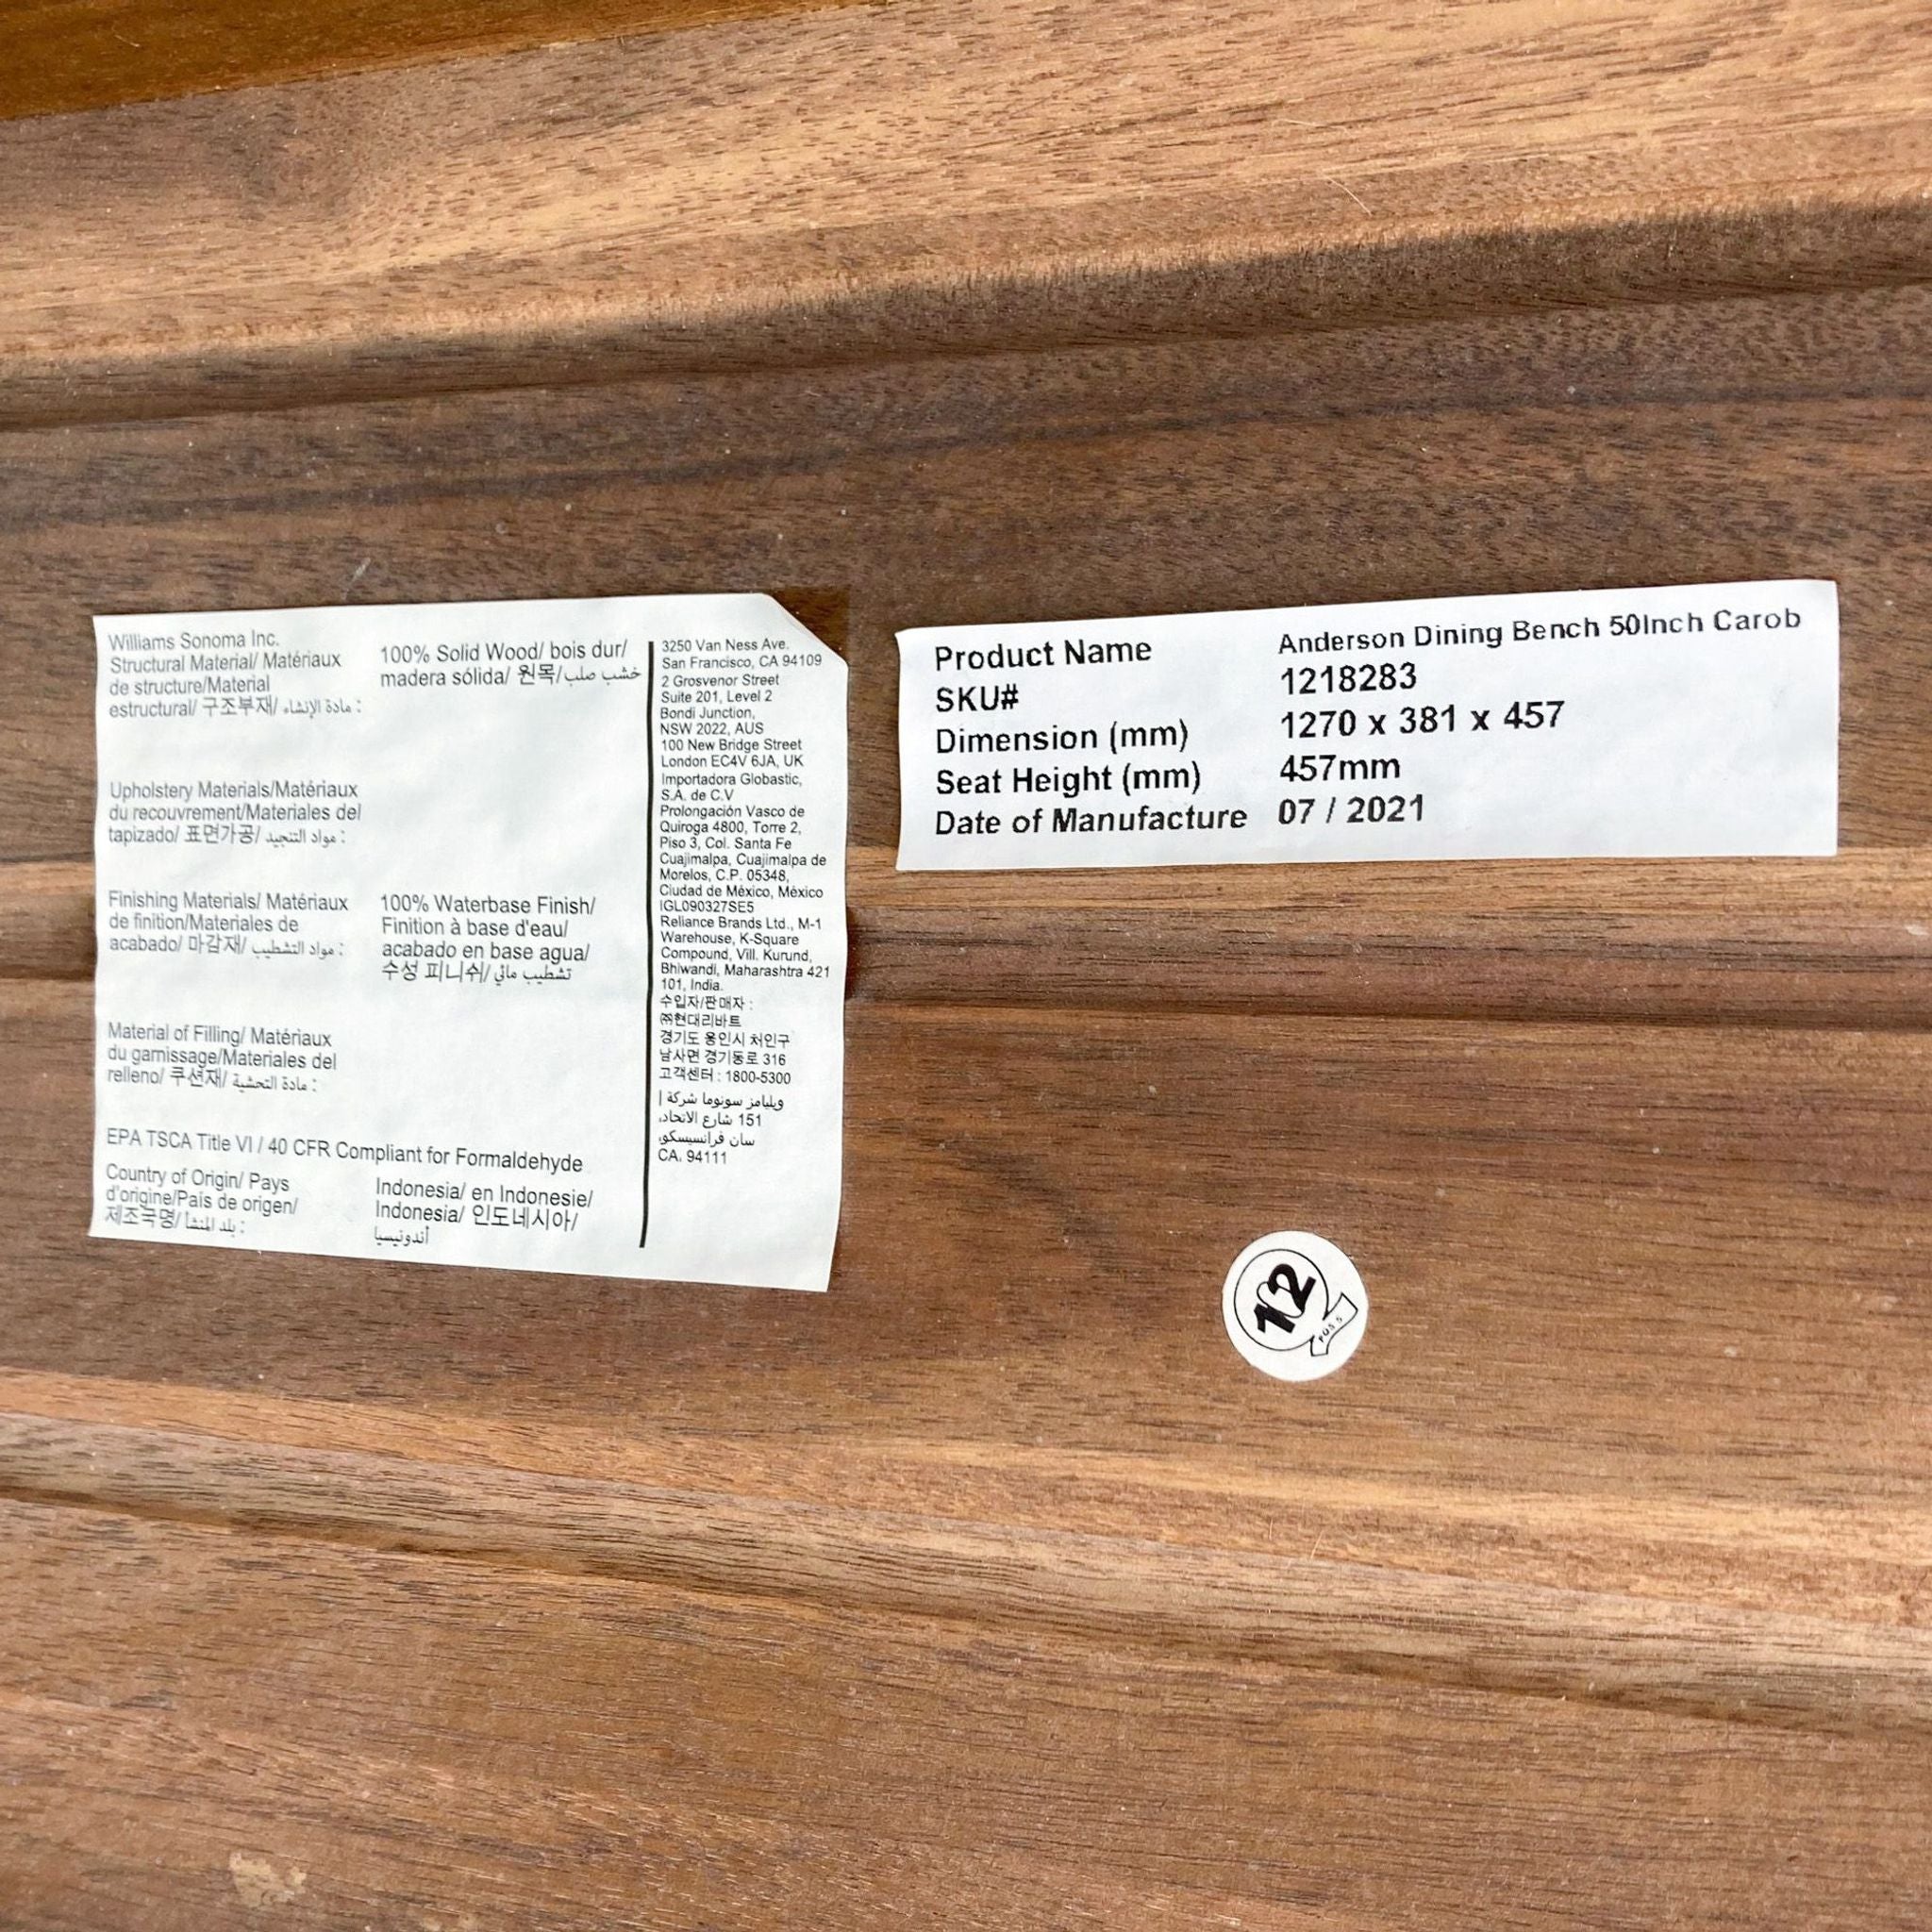 Label of West Elm's Anderson Dining Bench detailing solid wood material and dimensions in mm.